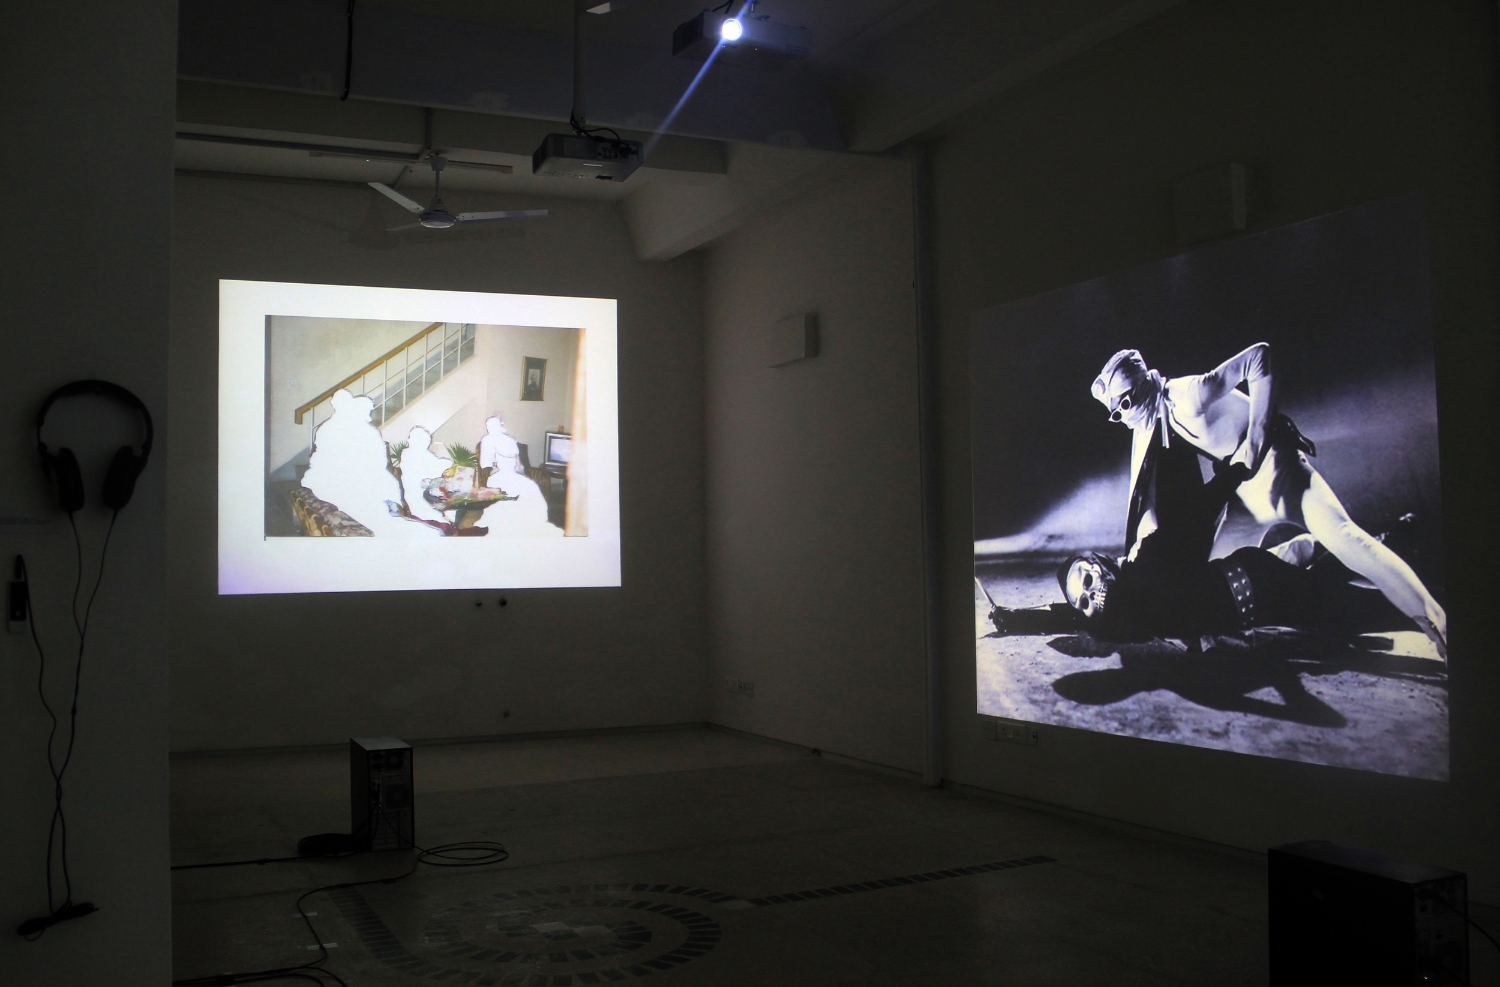  Exhibition view, to the left is Rabbya Naseer and Hurmat Ul Ain,&nbsp; Reenactment  (2012) and at right, Mehreen Murtaza,&nbsp; This Film Should Be Played Loud  &nbsp;( 2012). Photograph by Sadia Shirazi.&nbsp; 